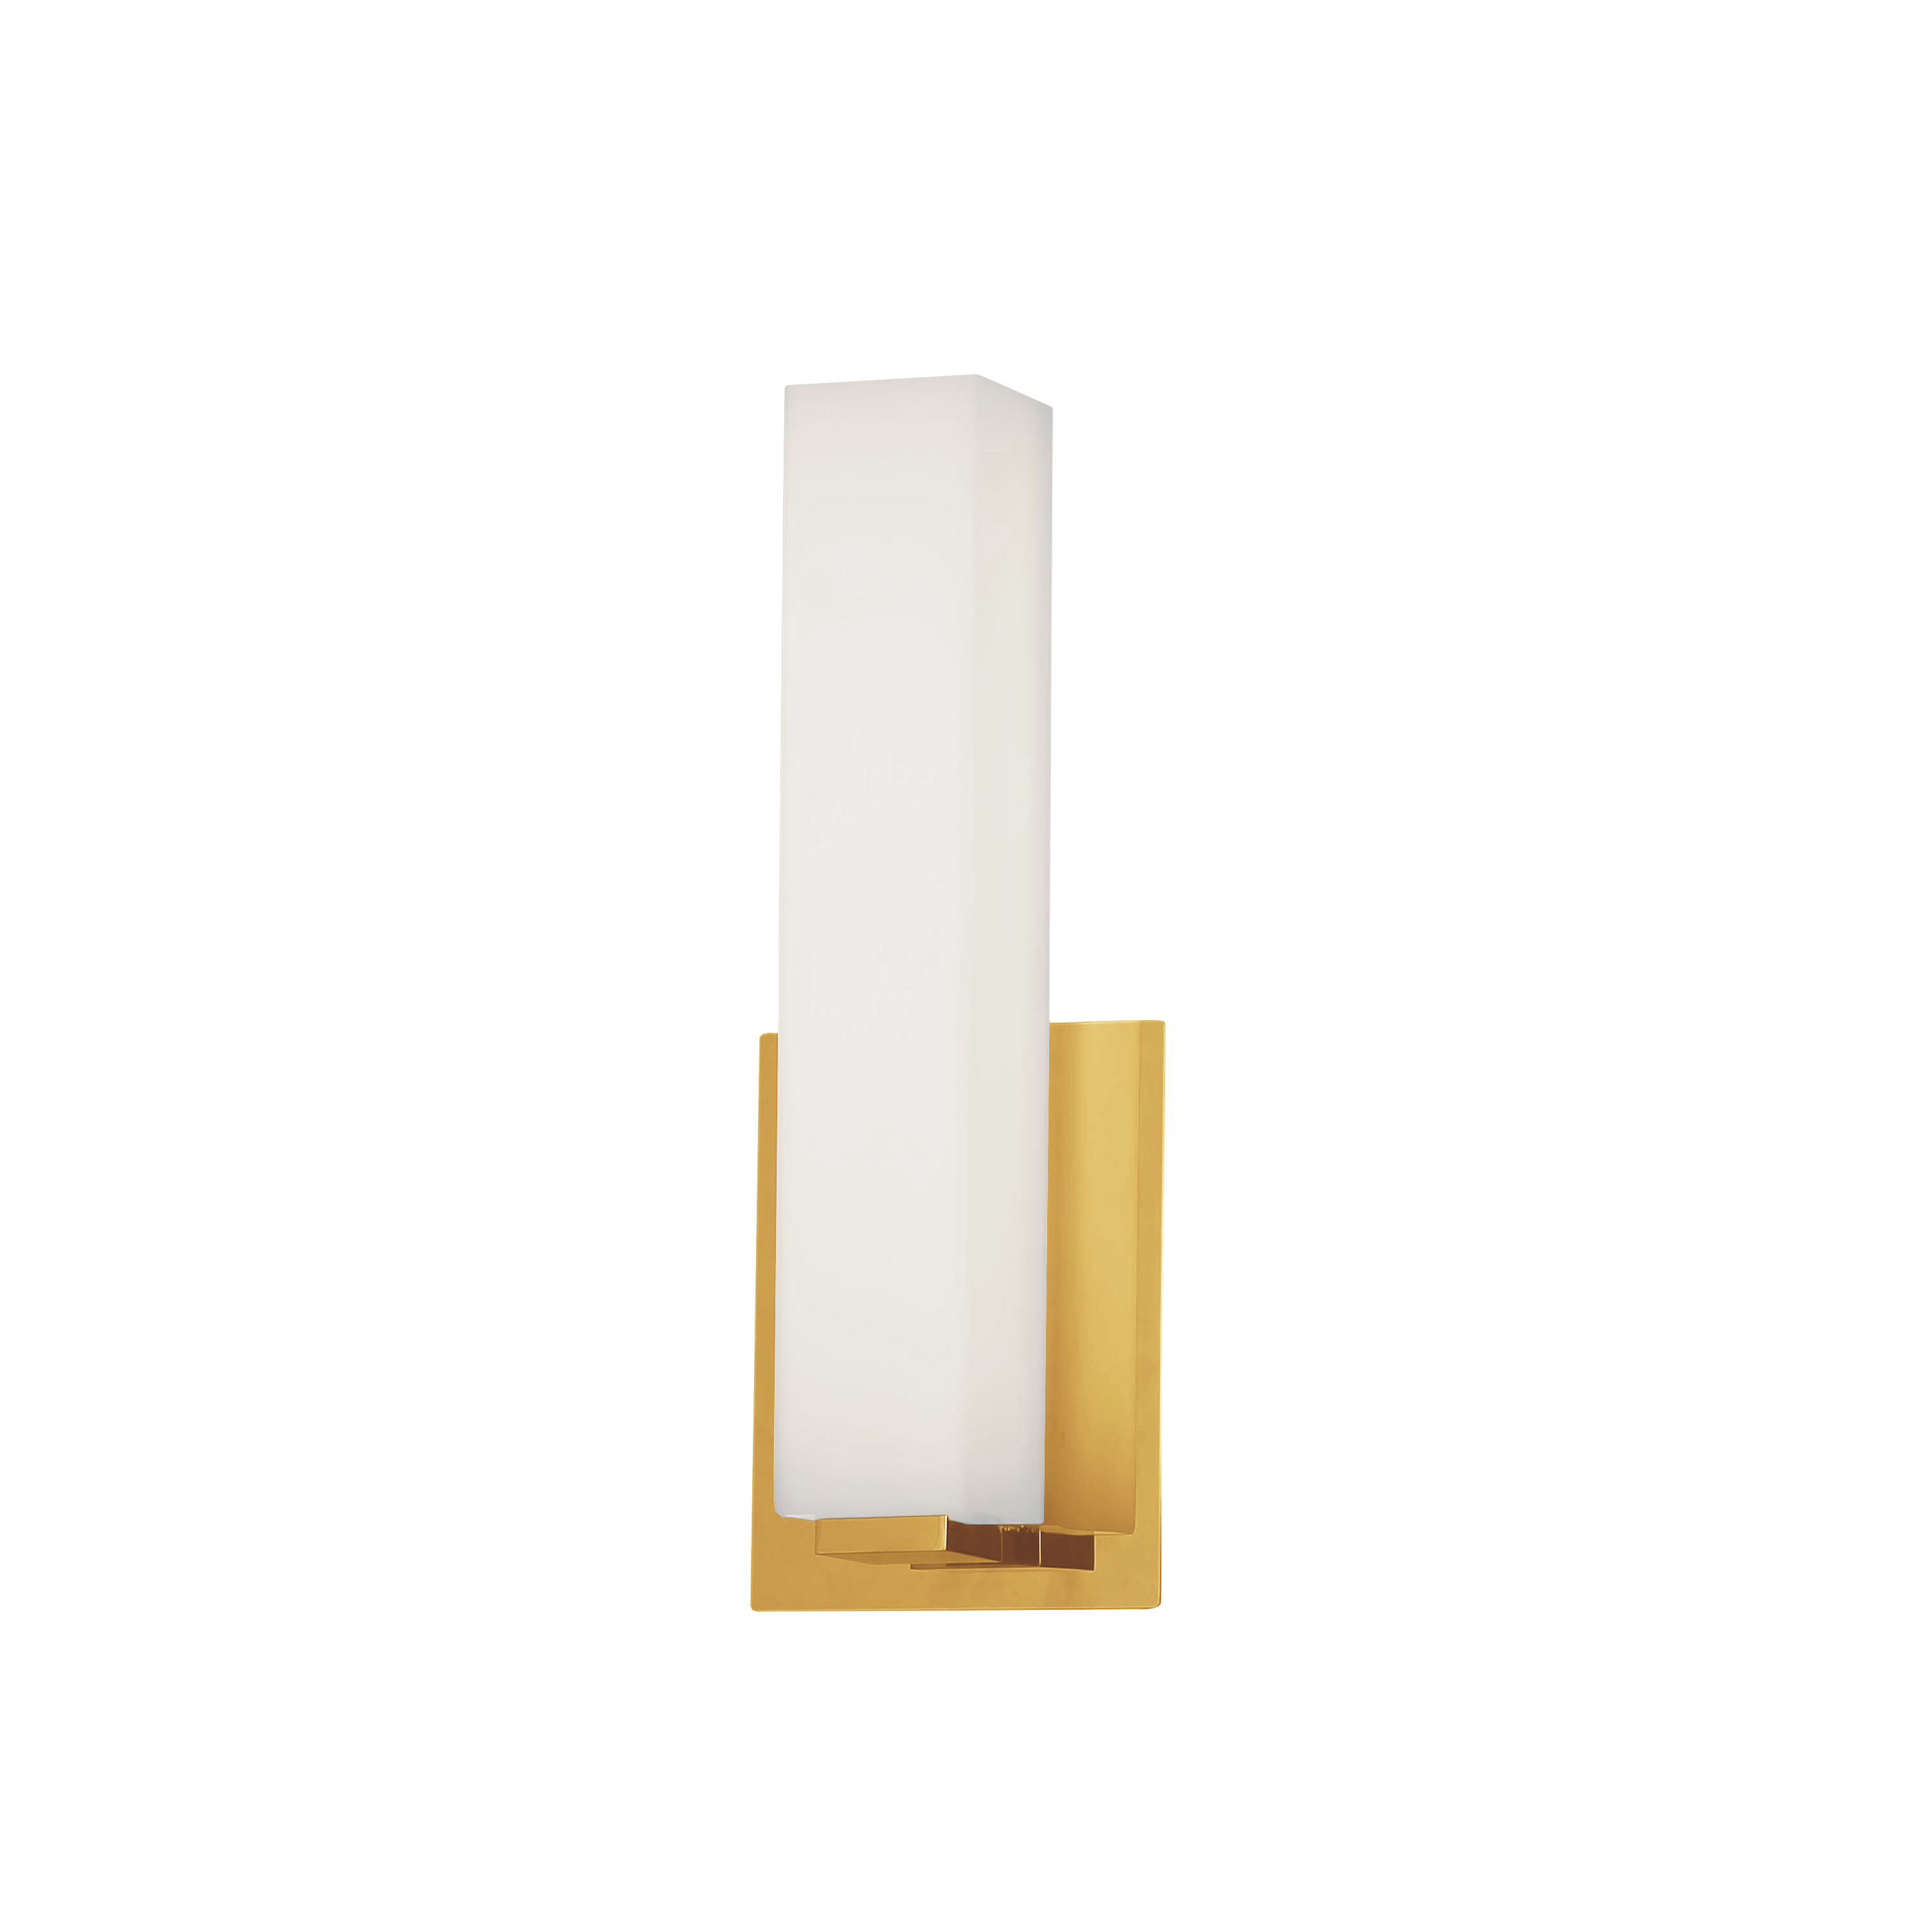 12W Wall Sconce, AGB w/ WH Glass